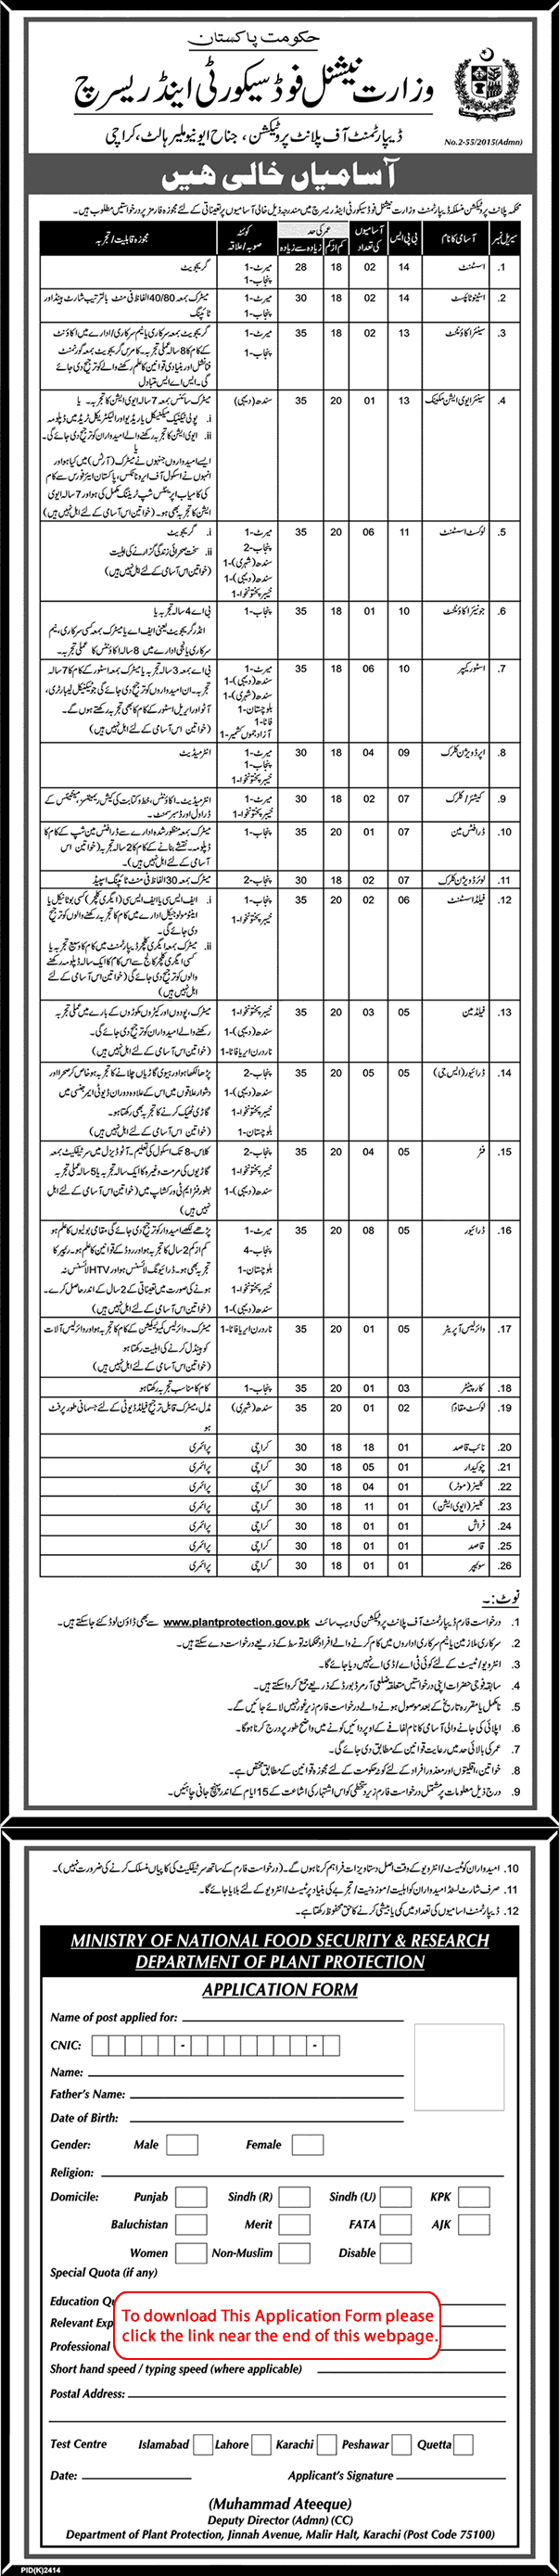 Department of Plant Protection Karachi Jobs 2015 February Application Form Ministry of National Food Security & Research